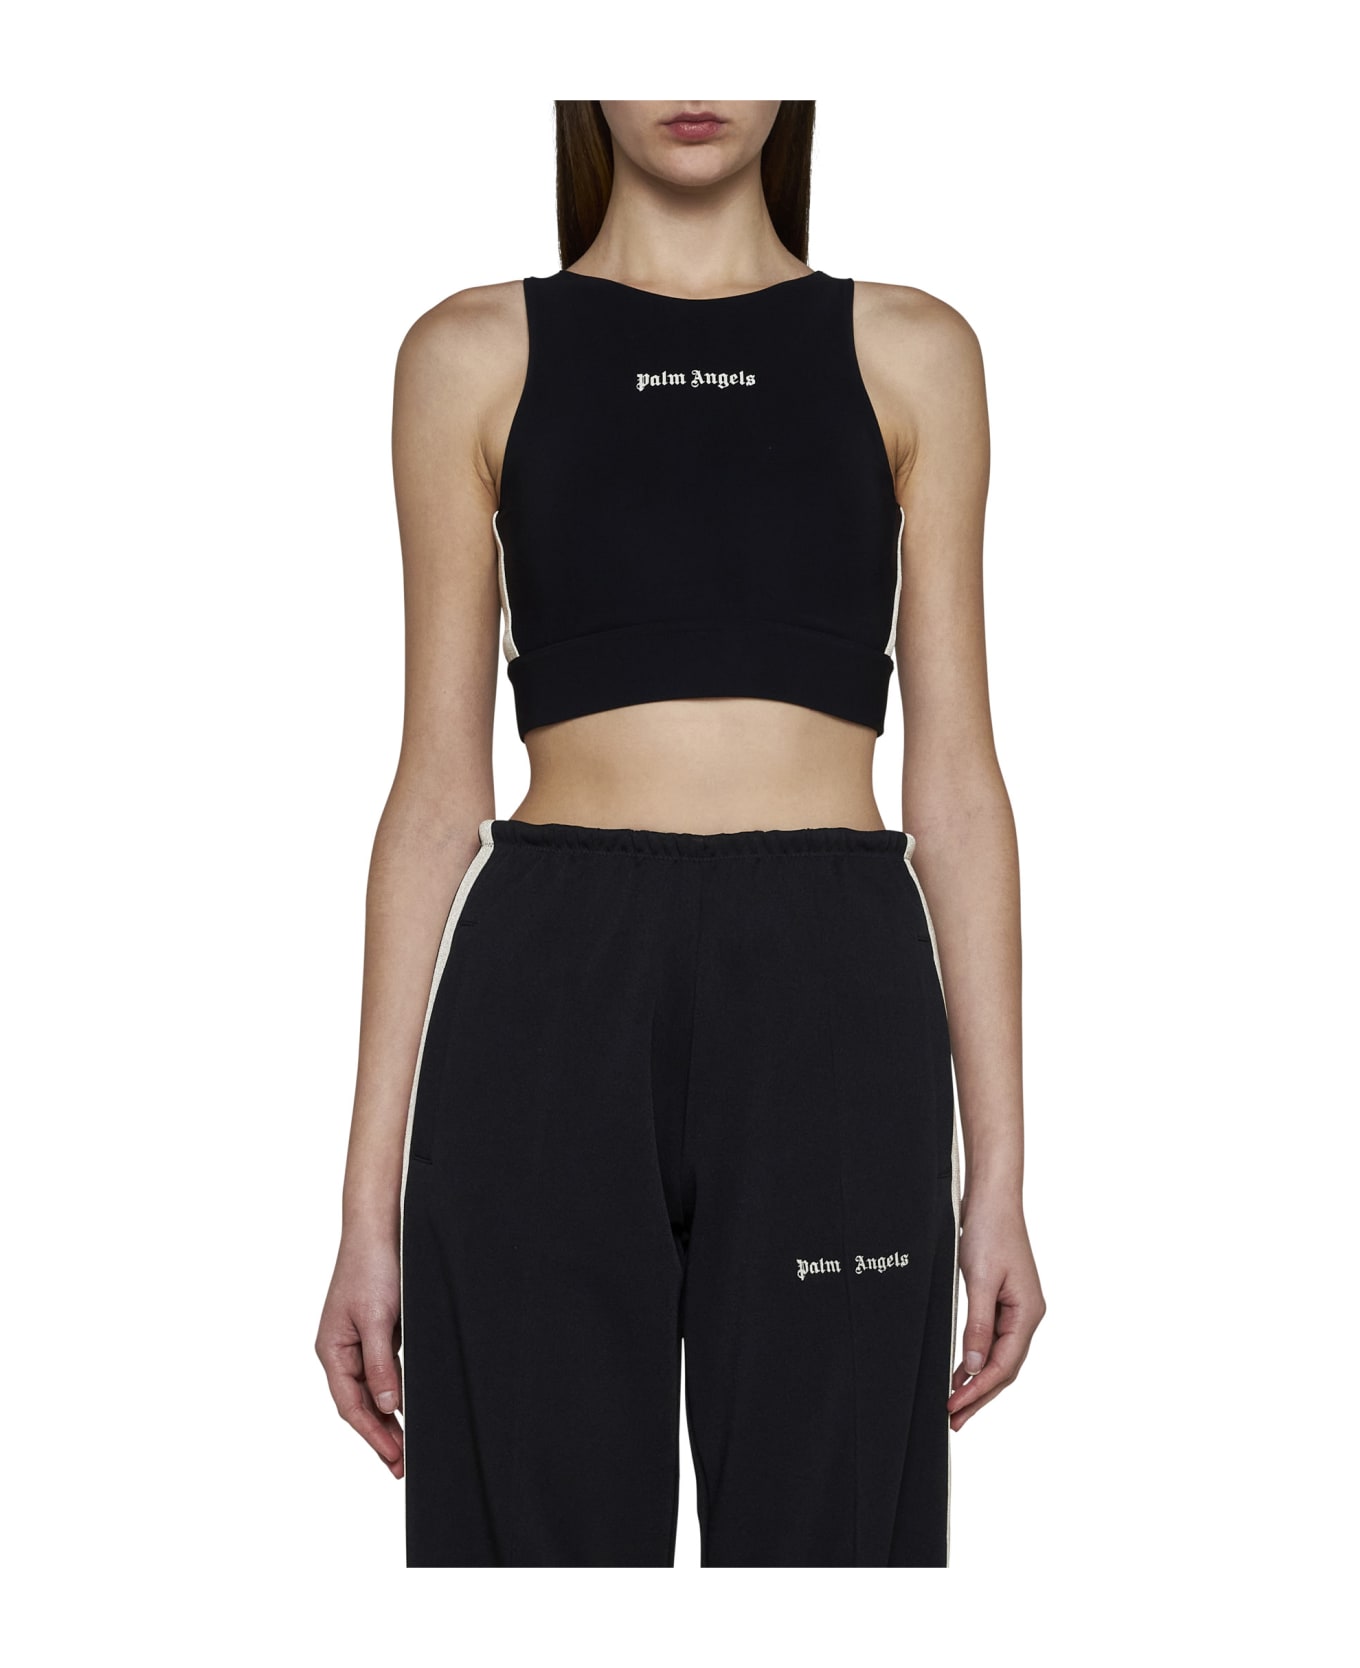 Palm Angels 'b Track Training' Sports Top - Black off white ランジェリー＆パジャマ